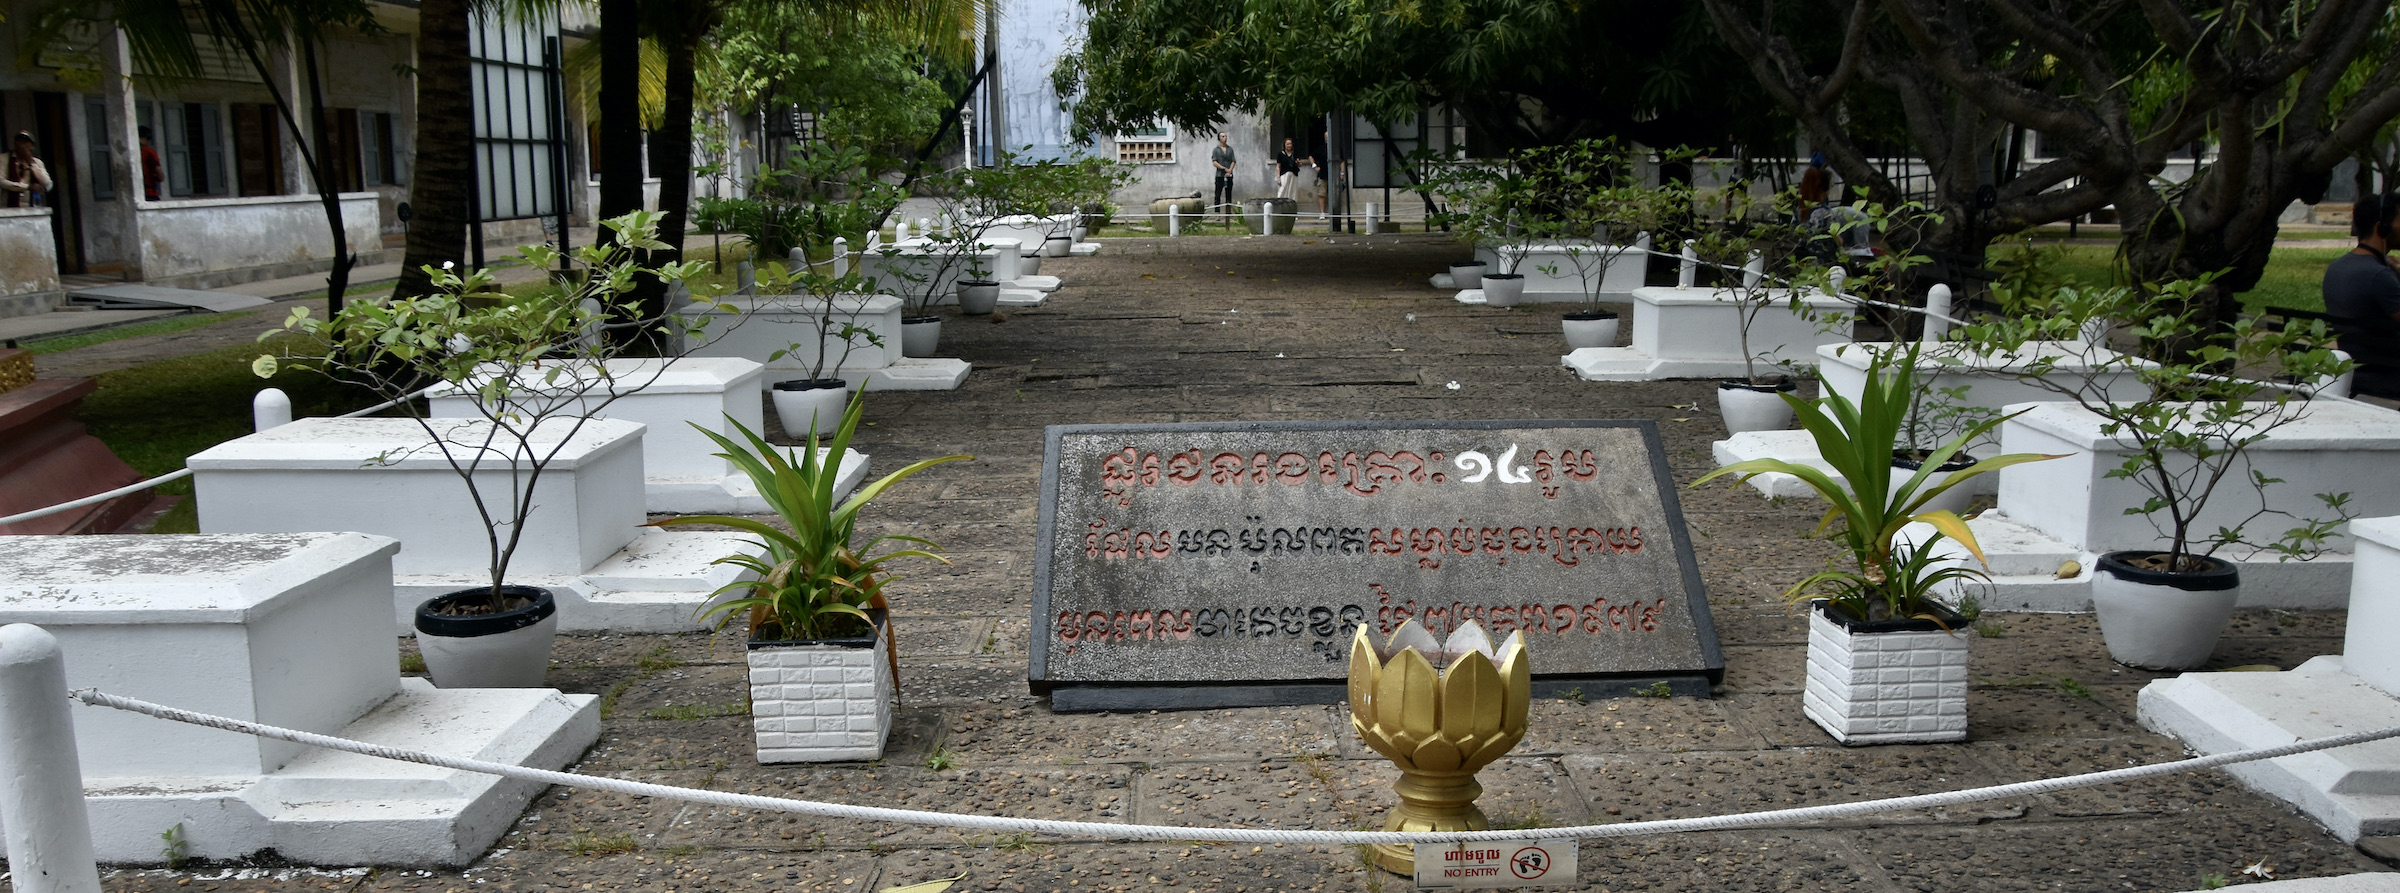 Graves of the Final 13 Found in the VIP Cells, The Killing Fields